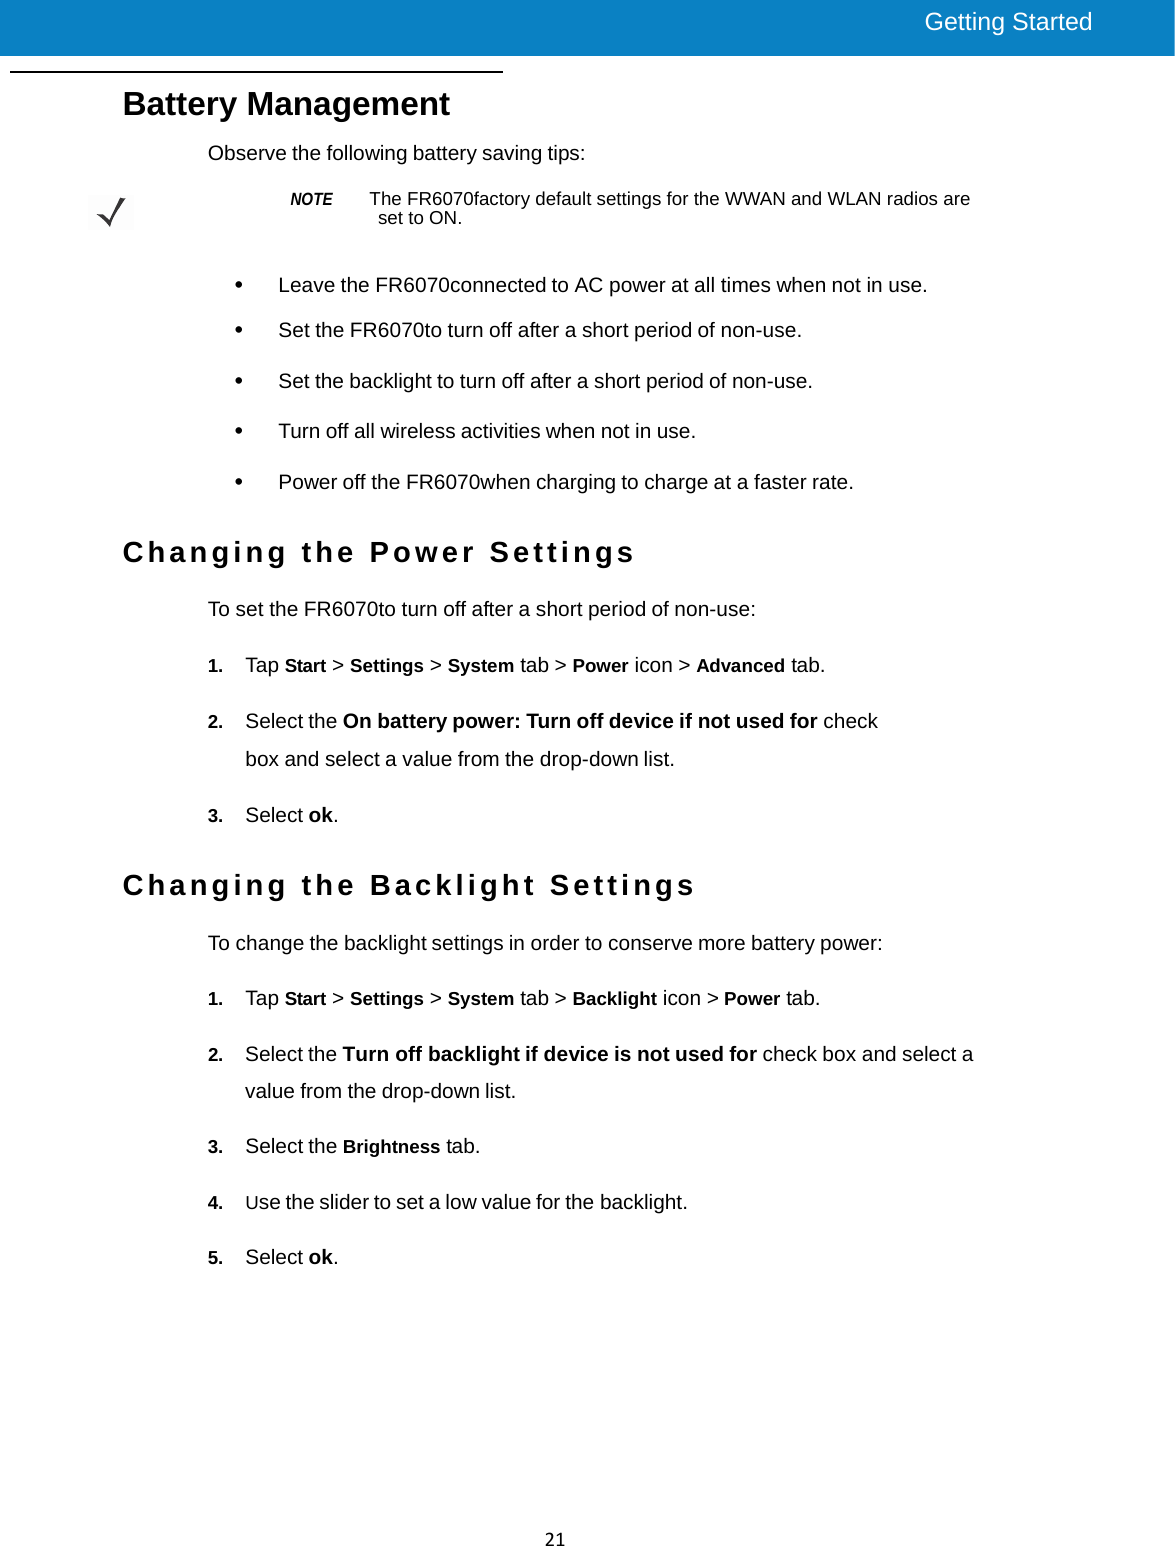 Getting Started     FR6800 UserGuide 21 Battery Management Observe the following battery saving tips:  NOTE    The FR6070factory default settings for the WWAN and WLAN radios are set to ON.   •   Leave the FR6070connected to AC power at all times when not in use.  •   Set the FR6070to turn off after a short period of non-use.  •   Set the backlight to turn off after a short period of non-use.  •   Turn off all wireless activities when not in use.  •   Power off the FR6070when charging to charge at a faster rate.   Changing the Power Settings  To set the FR6070to turn off after a short period of non-use:  1.  Tap Start &gt; Settings &gt; System tab &gt; Power icon &gt; Advanced tab.  2.  Select the On battery power: Turn off device if not used for check box and select a value from the drop-down list.  3.  Select ok.   Changing the Backlight Settings  To change the backlight settings in order to conserve more battery power:    1.  Tap Start &gt; Settings &gt; System tab &gt; Backlight icon &gt; Power tab.  2.  Select the Turn off backlight if device is not used for check box and select a value from the drop-down list.  3.  Select the Brightness tab.  4.  Use the slider to set a low value for the backlight.  5.  Select ok.    